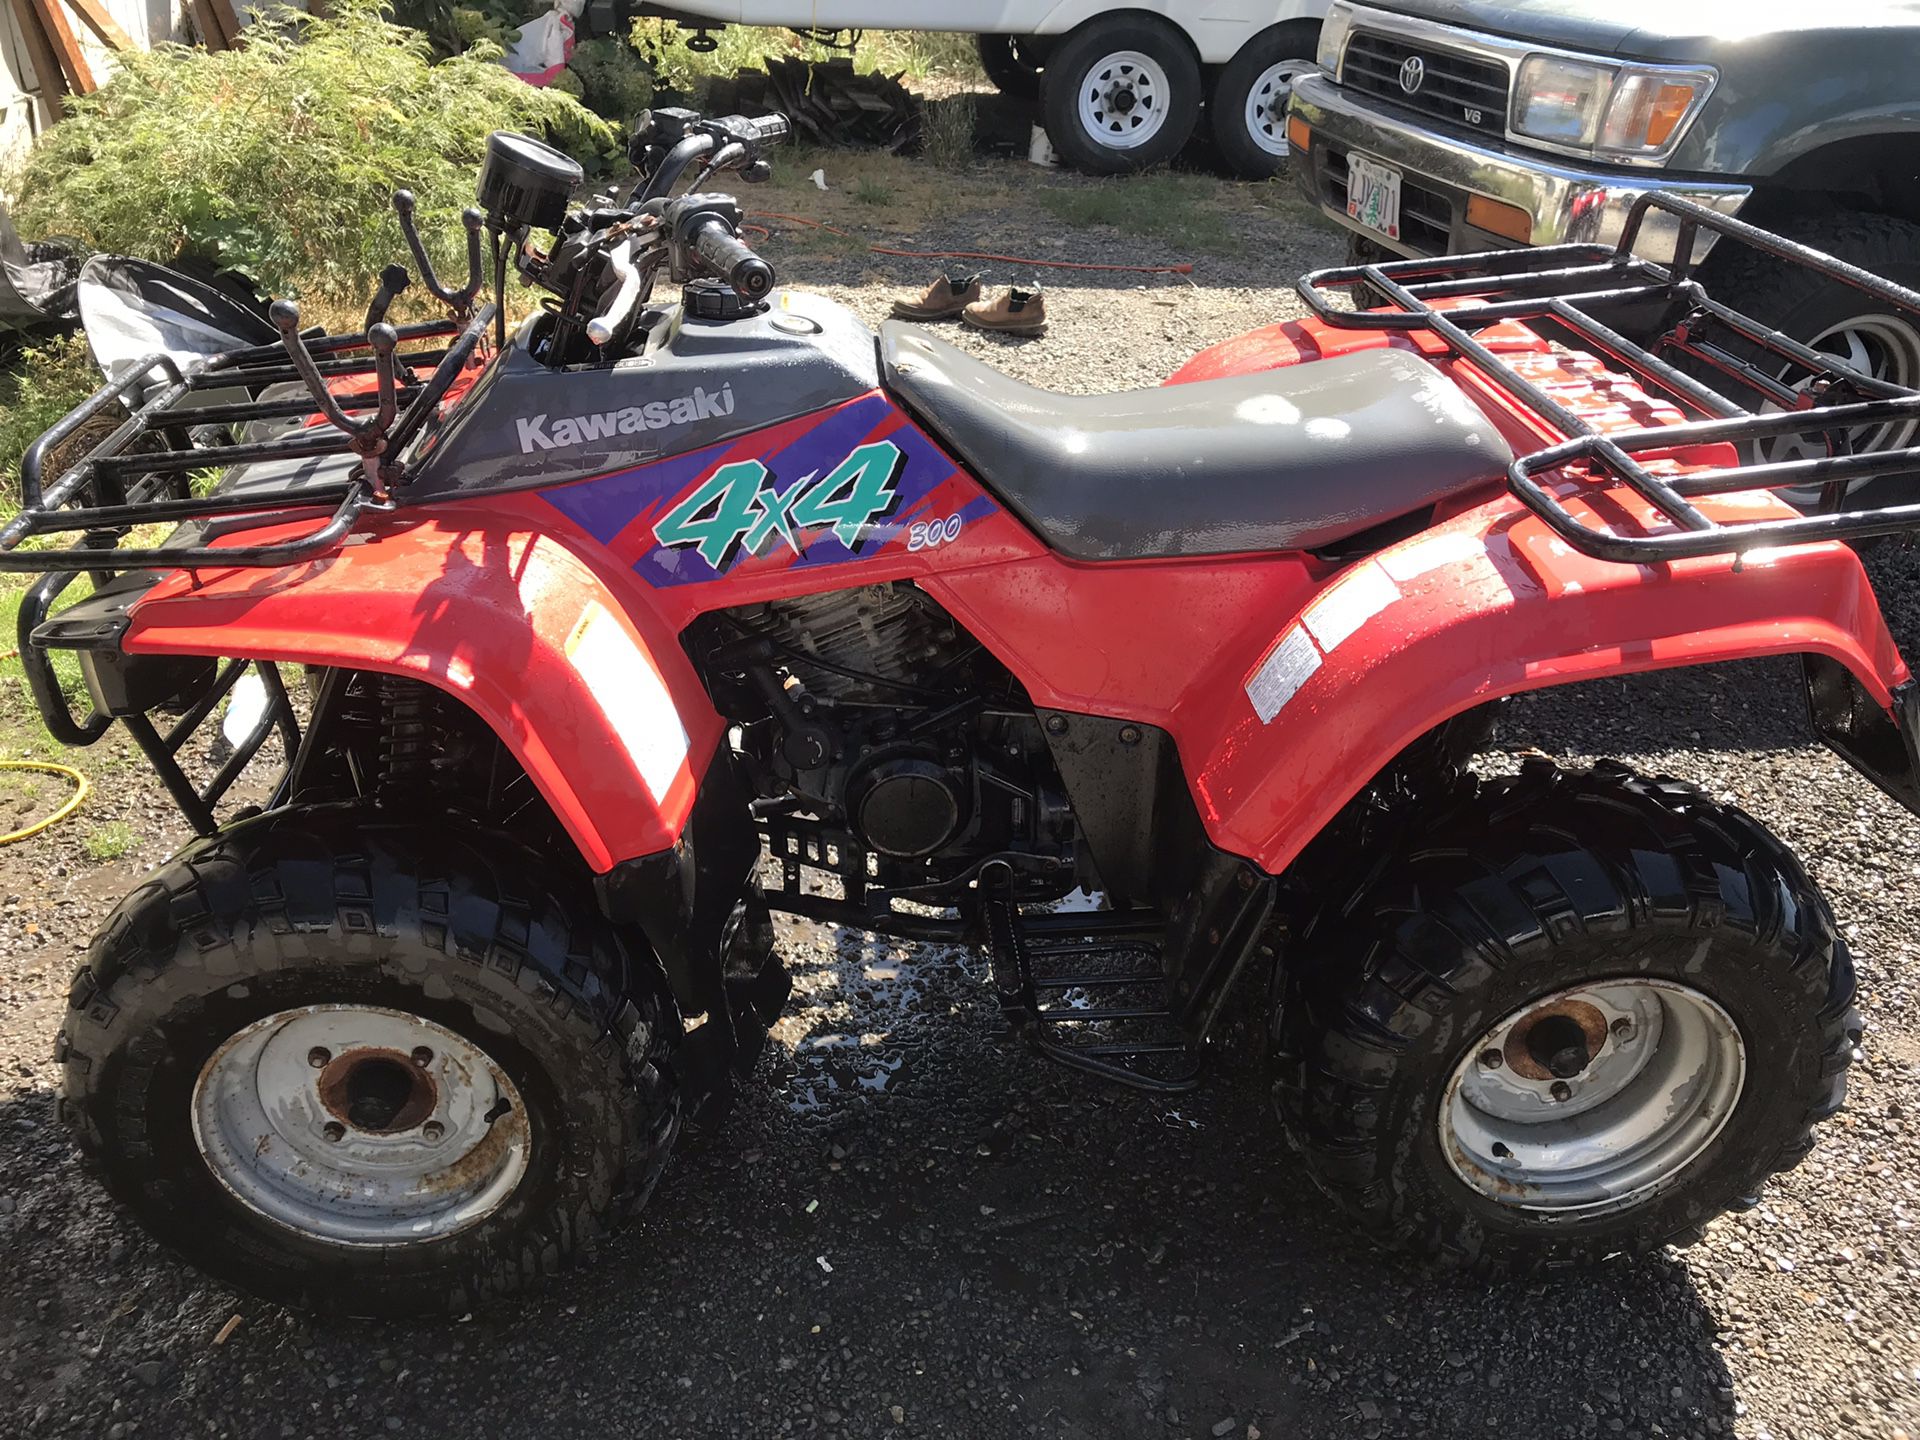 1996 KLF 300 4x4 been sitting awhile starts up and rides 4x4 works used condition $1000 no holds